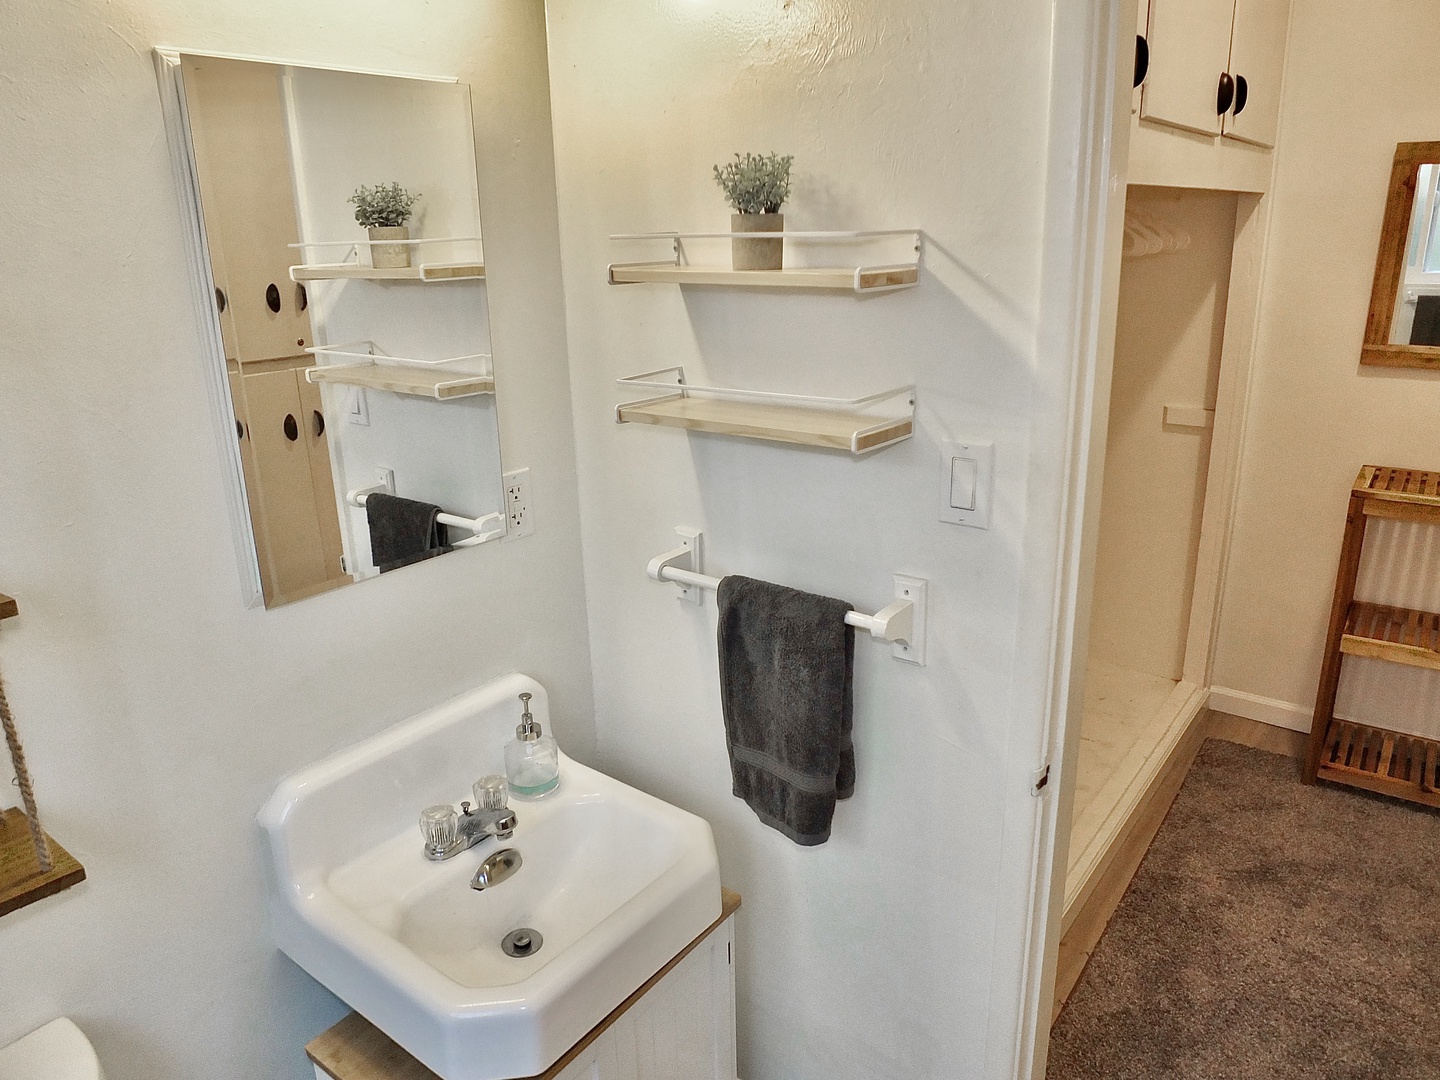 The full bathroom includes a single vanity & shower/tub combo